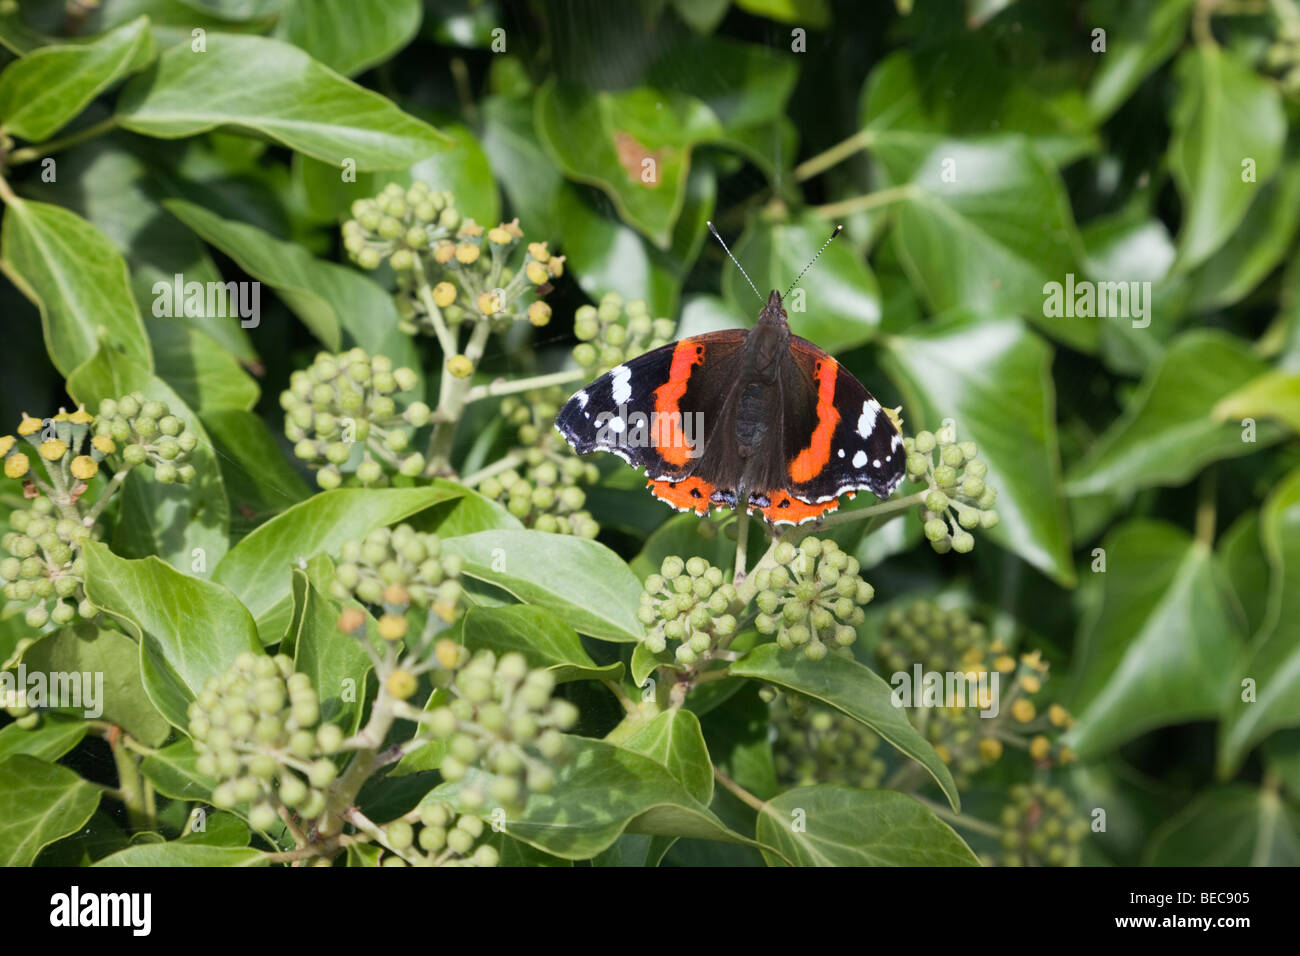 British nature a Red Admiral butterfly (Vanessa atalanta) on ivy flowers (Hedera helix) in early autumn. Wales, UK, Britain Stock Photo